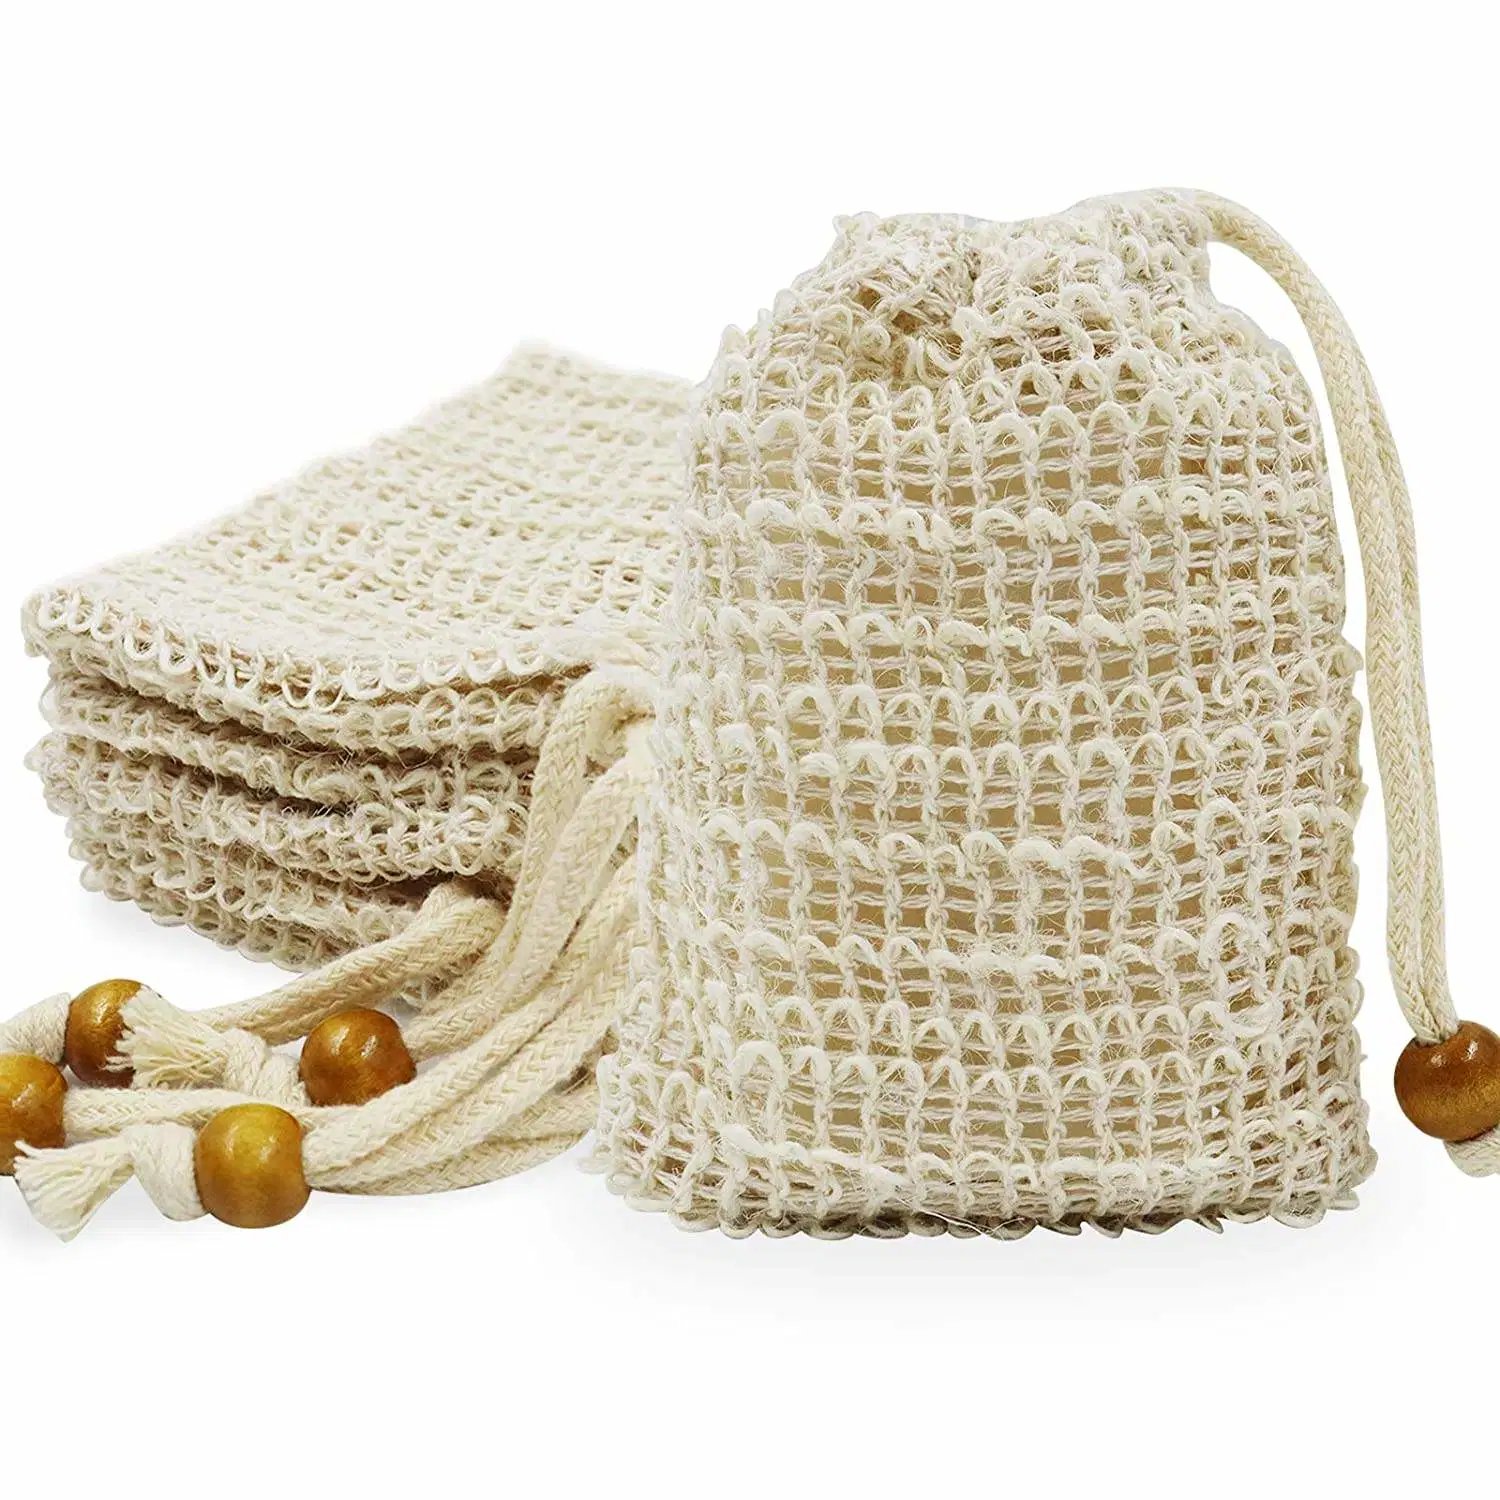 Natural Eco-Friendly Organic Sisal Soap Bag Foaming Pouch Scrubber Drying The Soap Bars Shower Mesh Soap Saver Bag Net